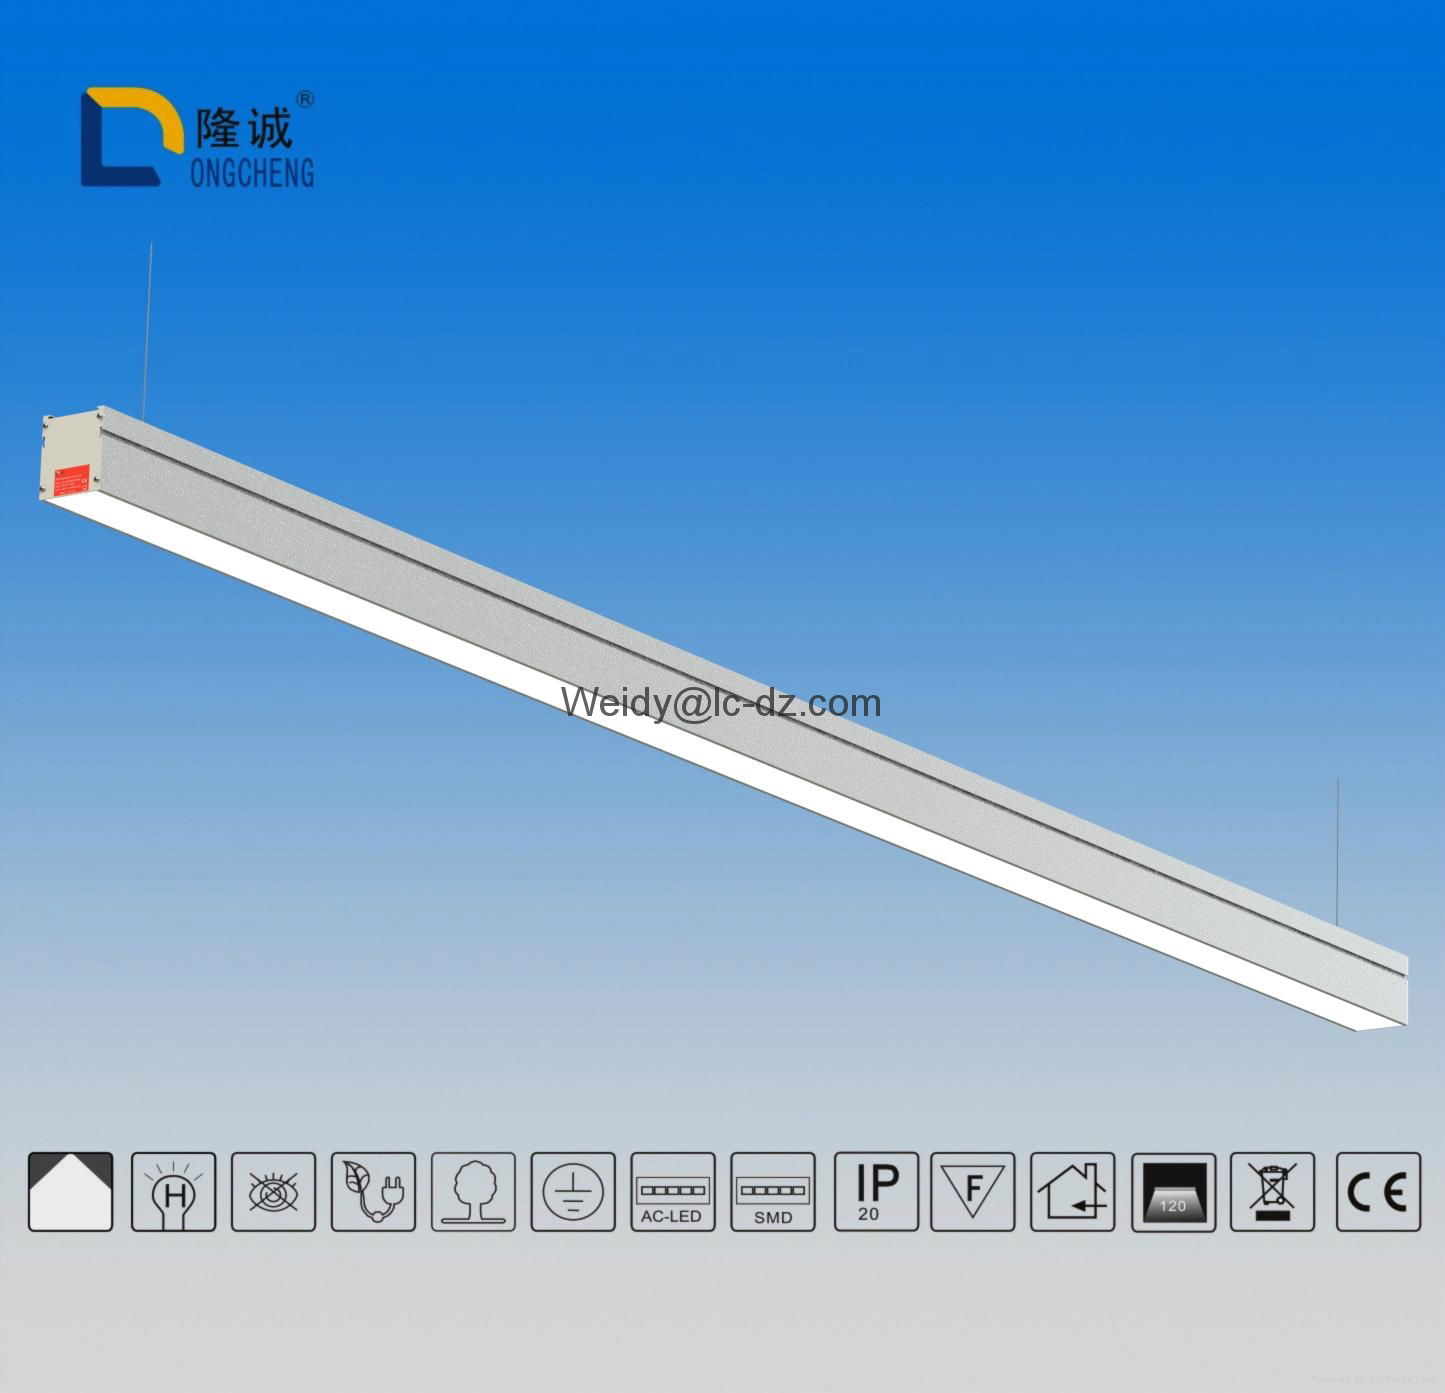 SMD chip DALI dimming system for linear office lamps 2